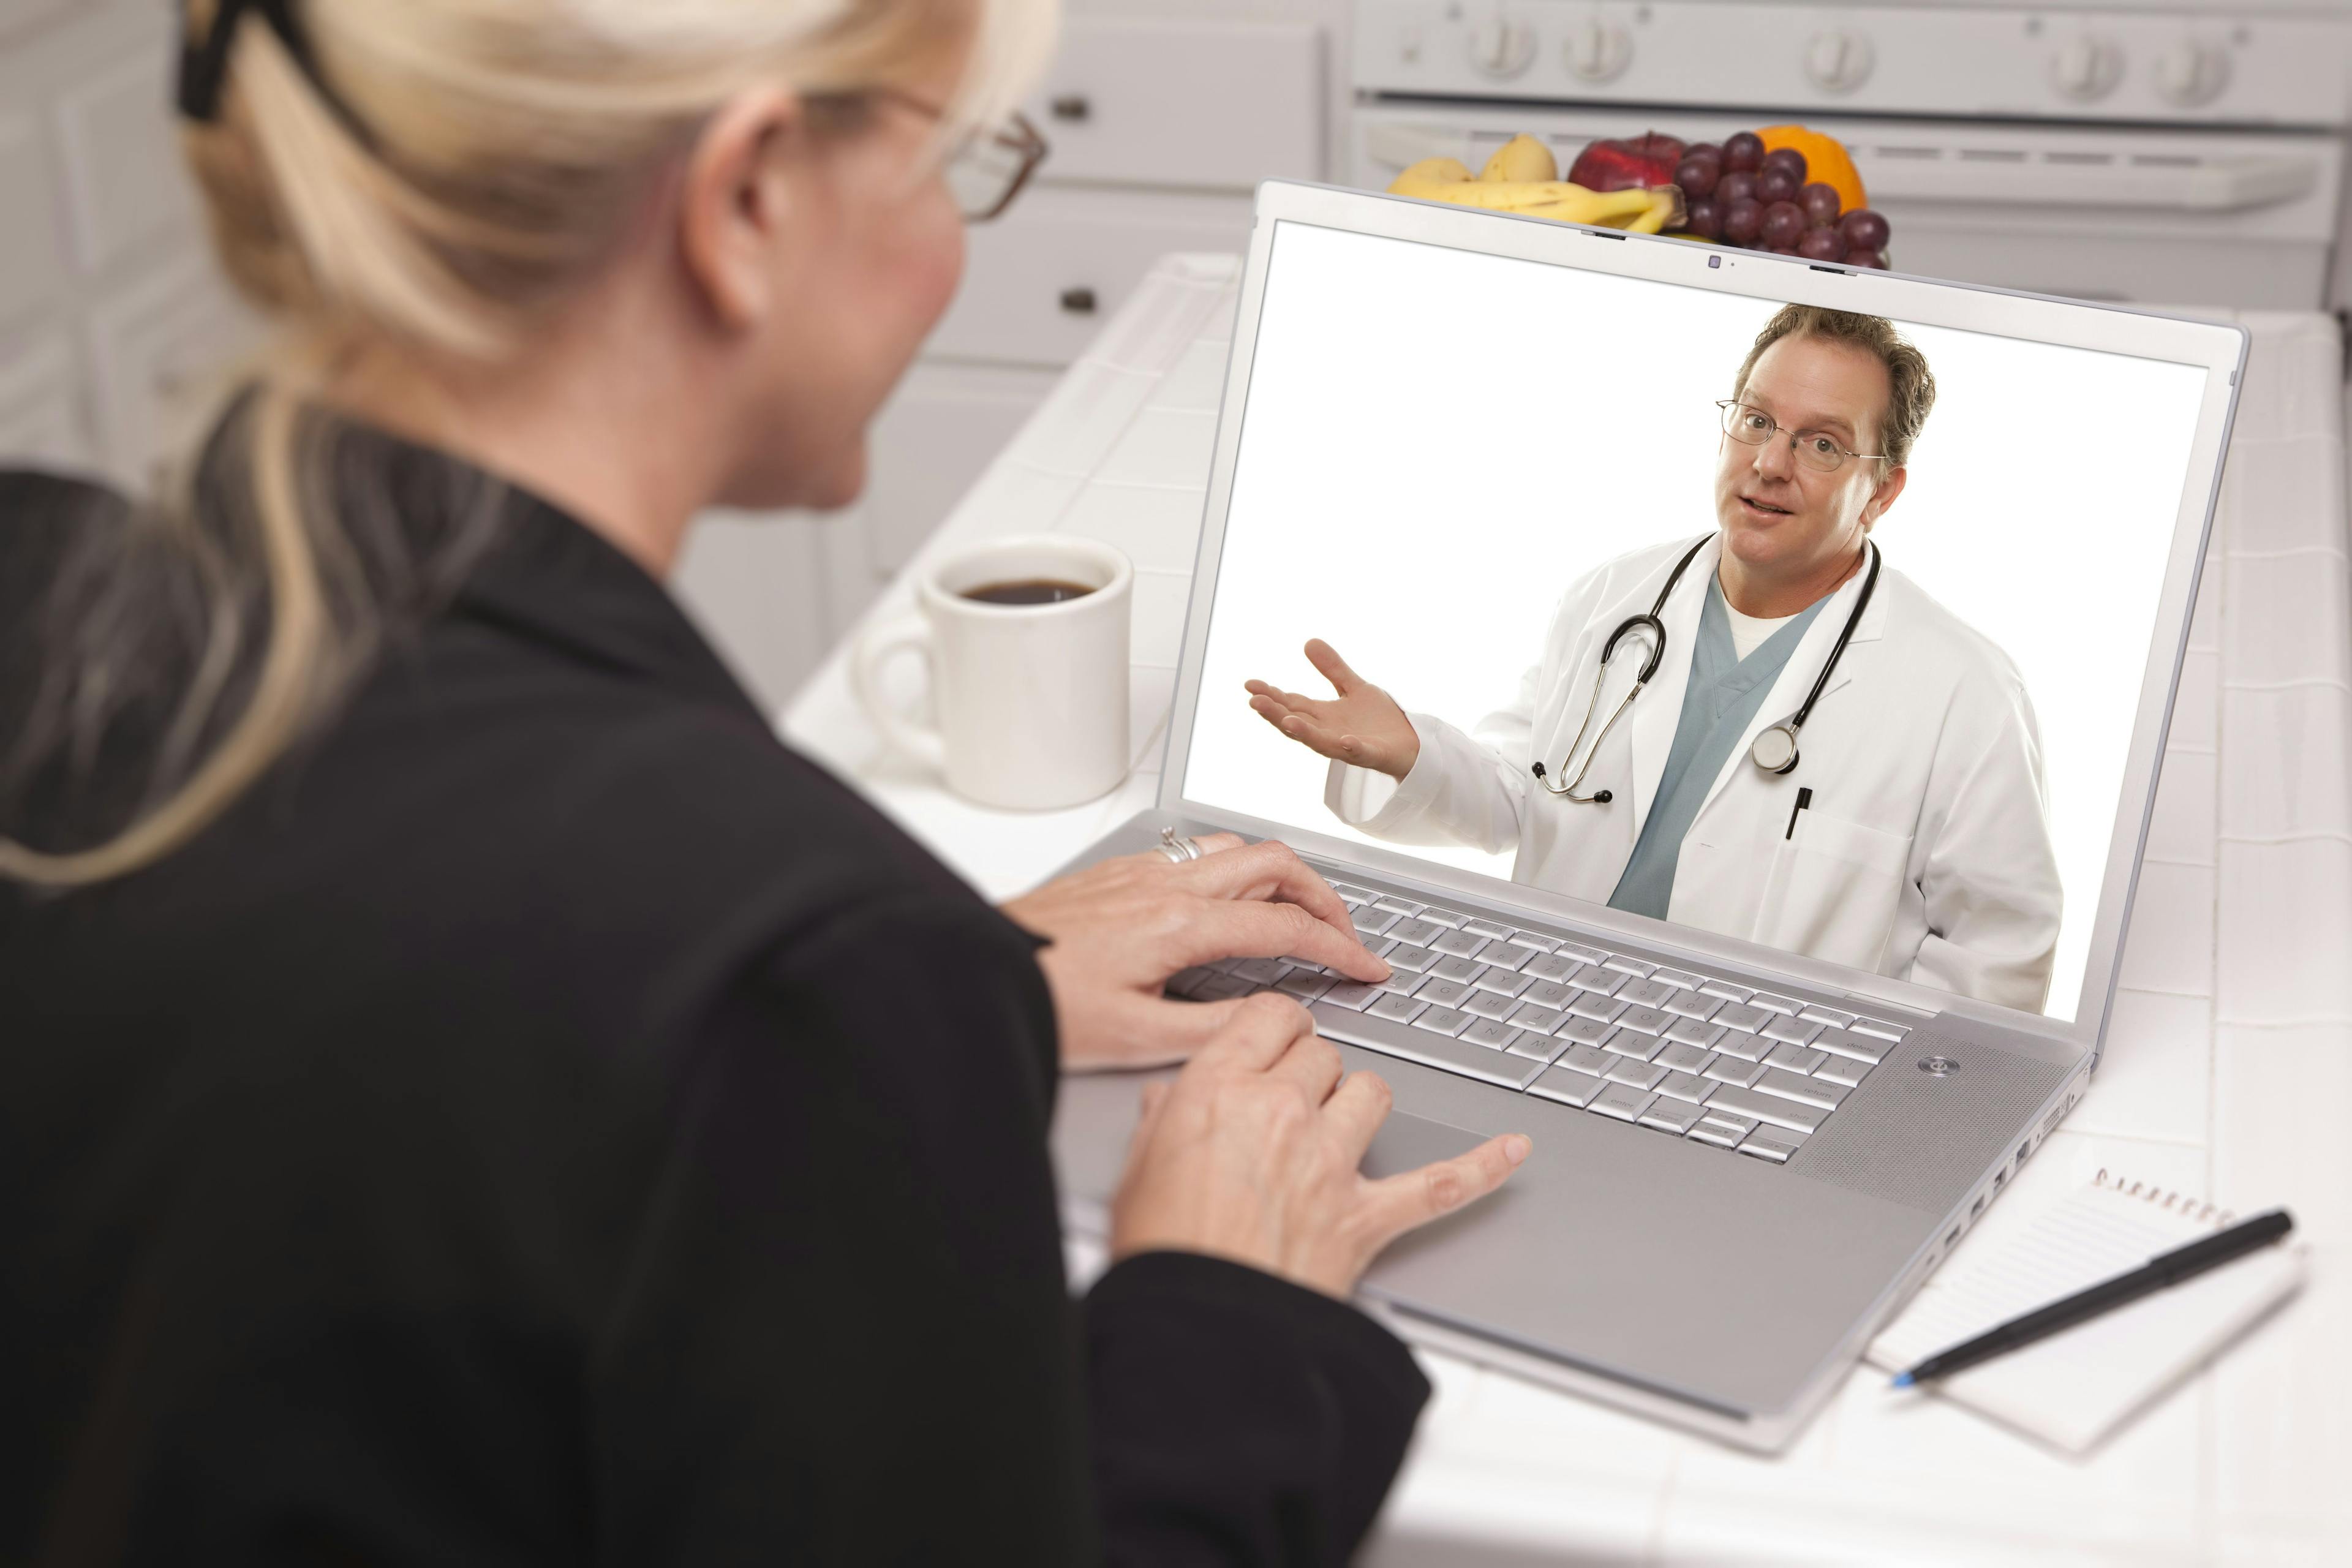 Patients With COPD Pivot to Telemedicine During Pandemic